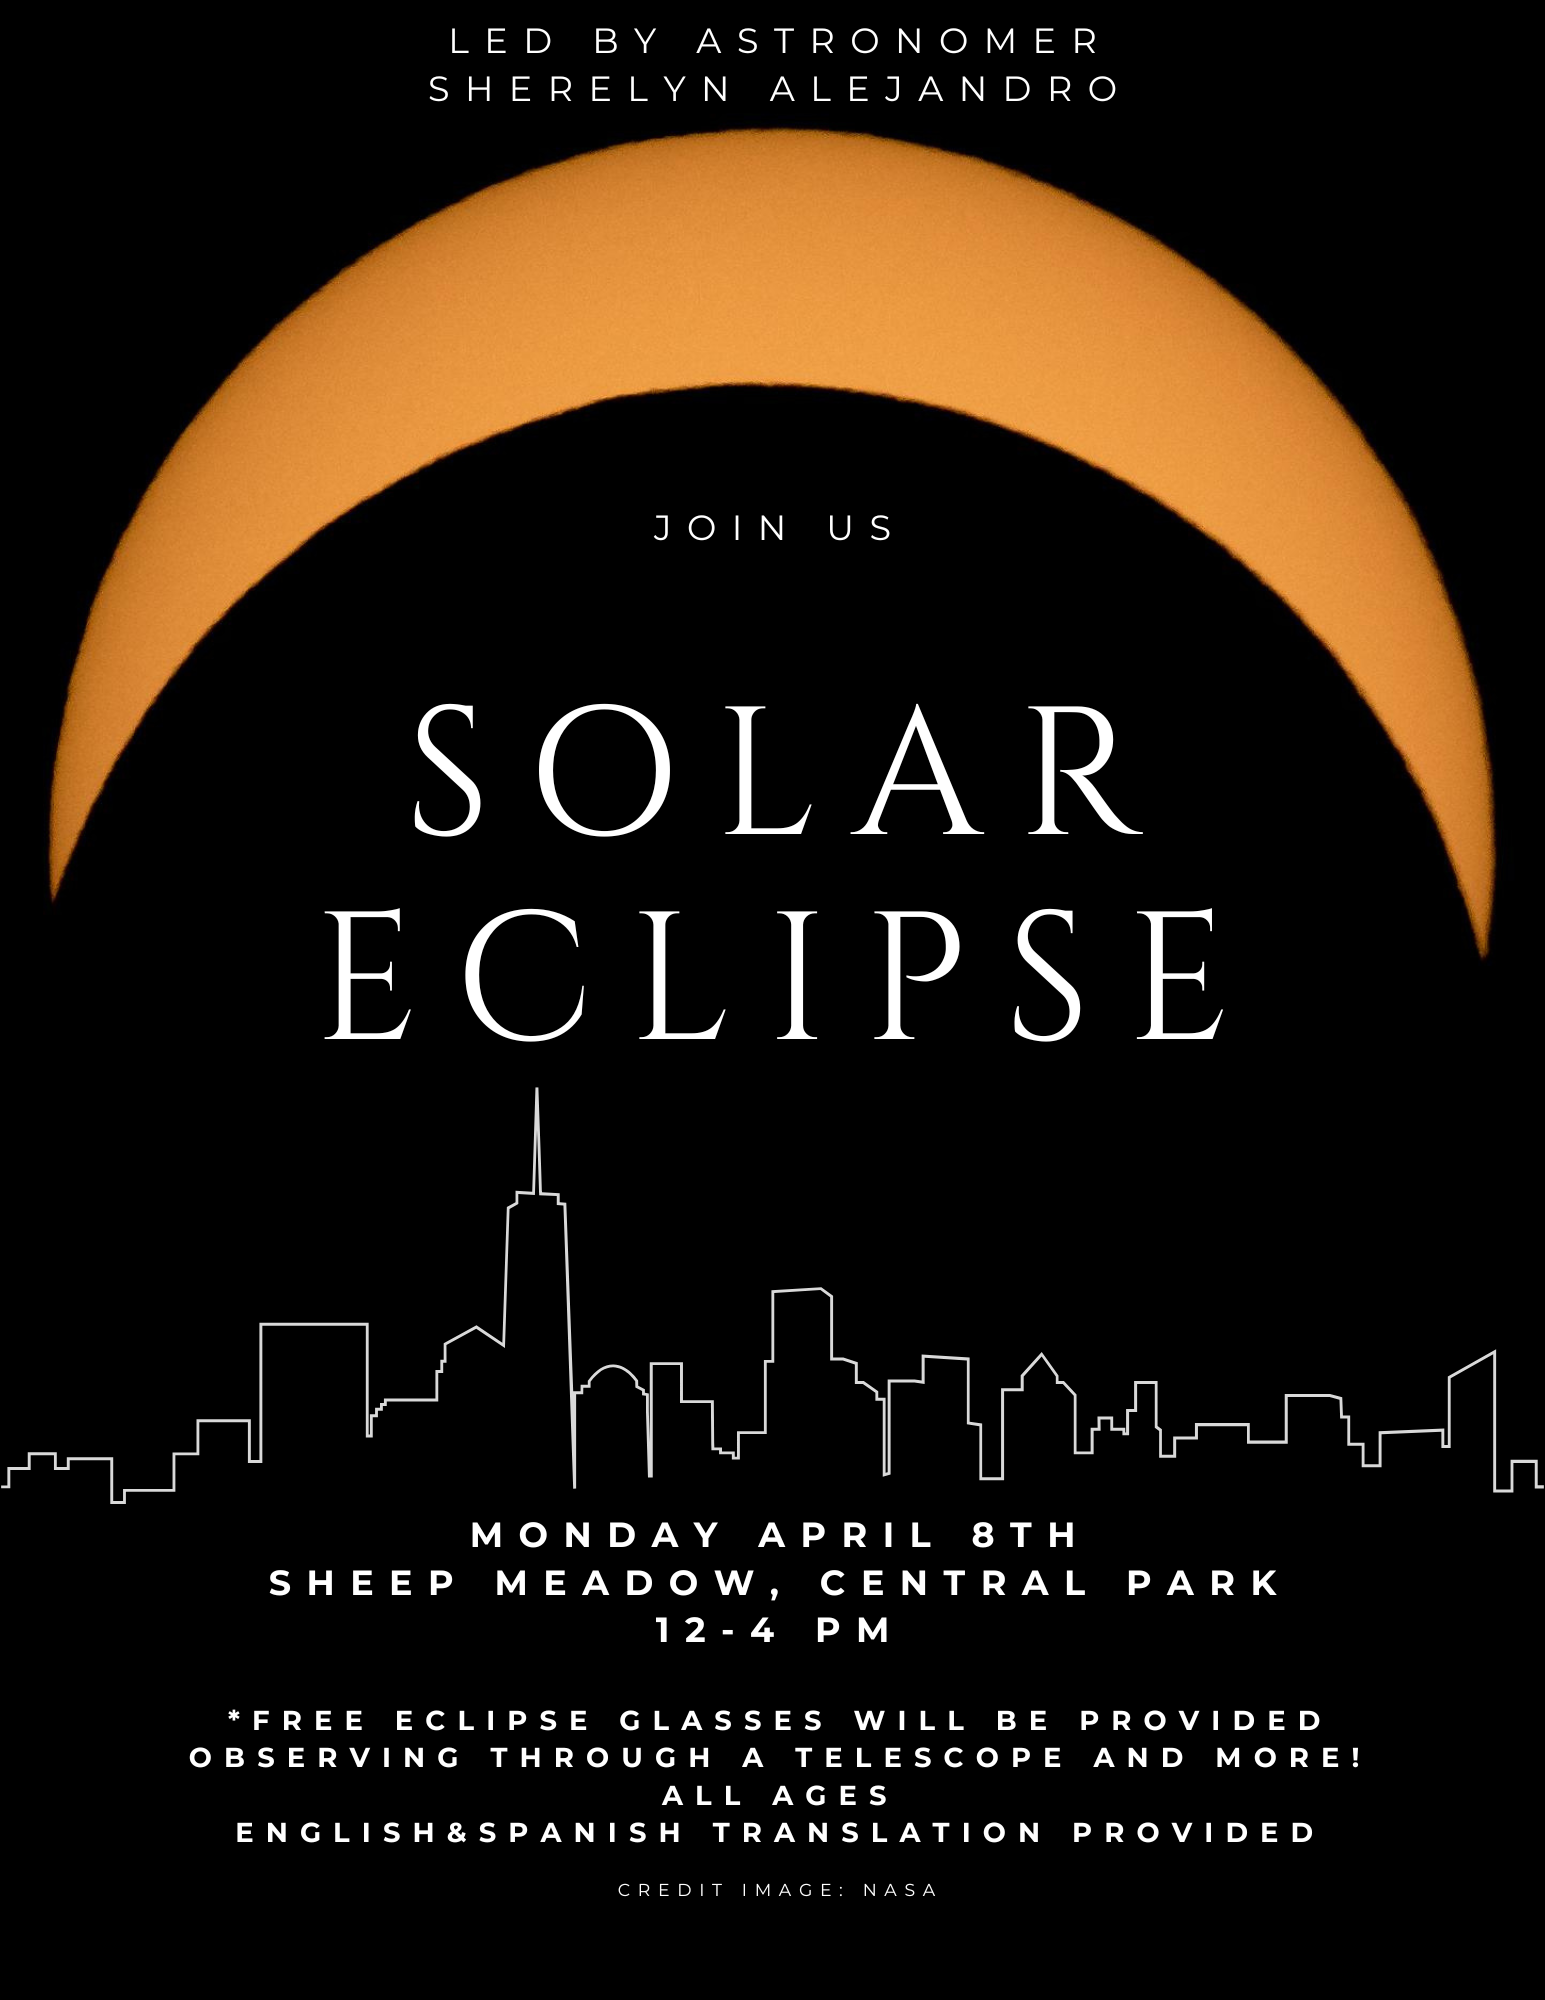 An invitation to Sherelyn's Solar Eclipse party in Sheep's Meadow, Central Park, 12–4pm on Monday, April 8th